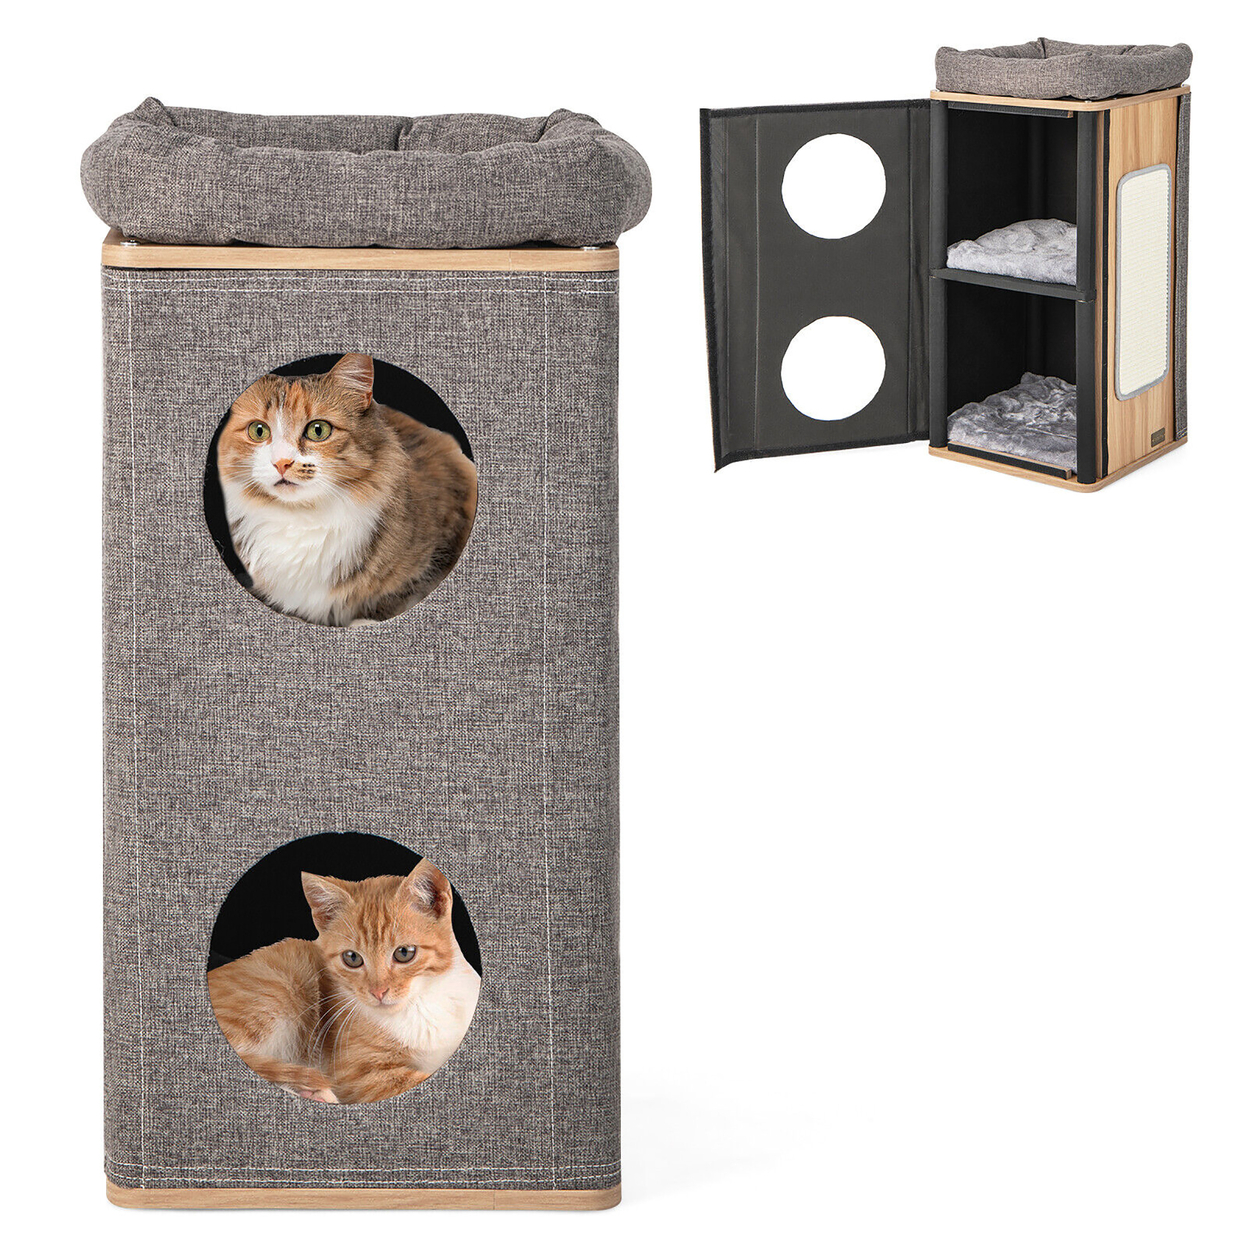 3-Story Cat House Multi-Layer Kitten Condo With Scratching Board Perch Cushions